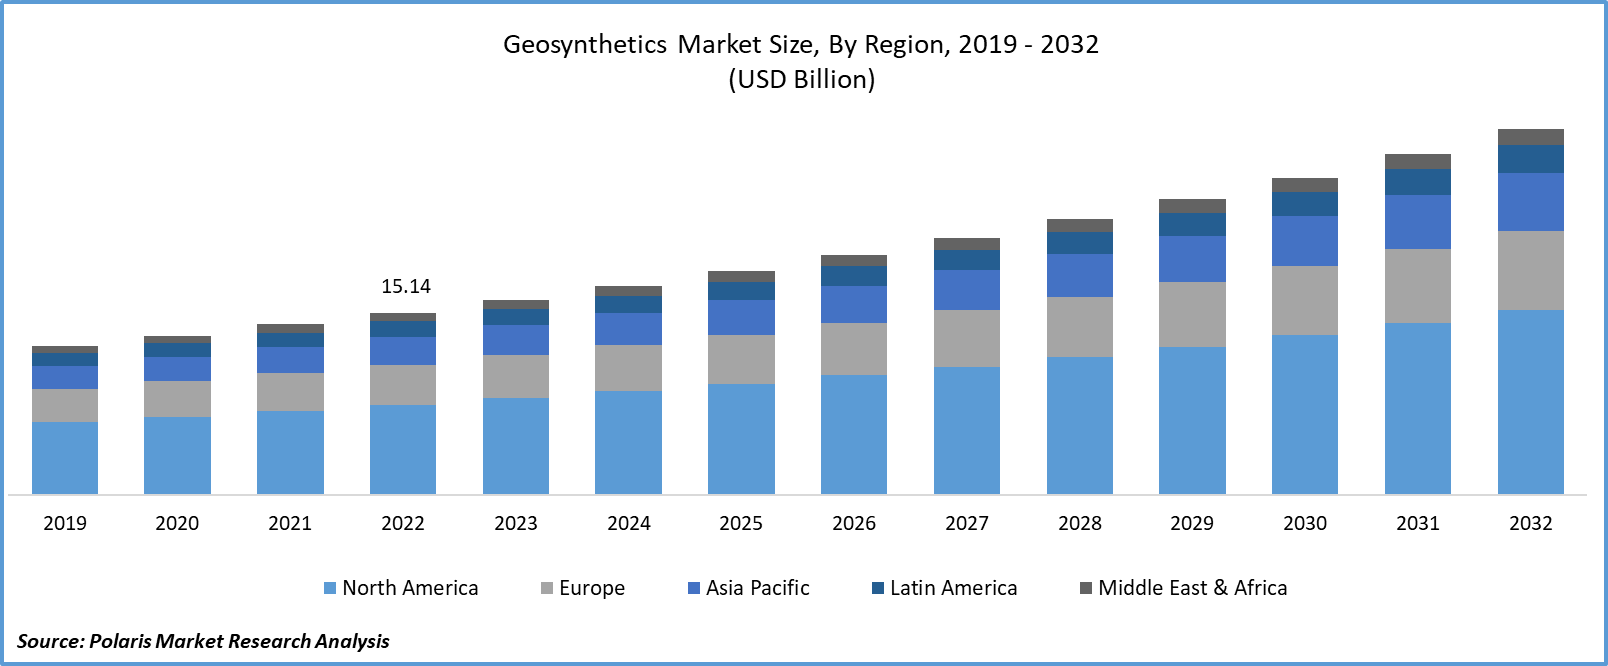 Geosynthetic Market Size